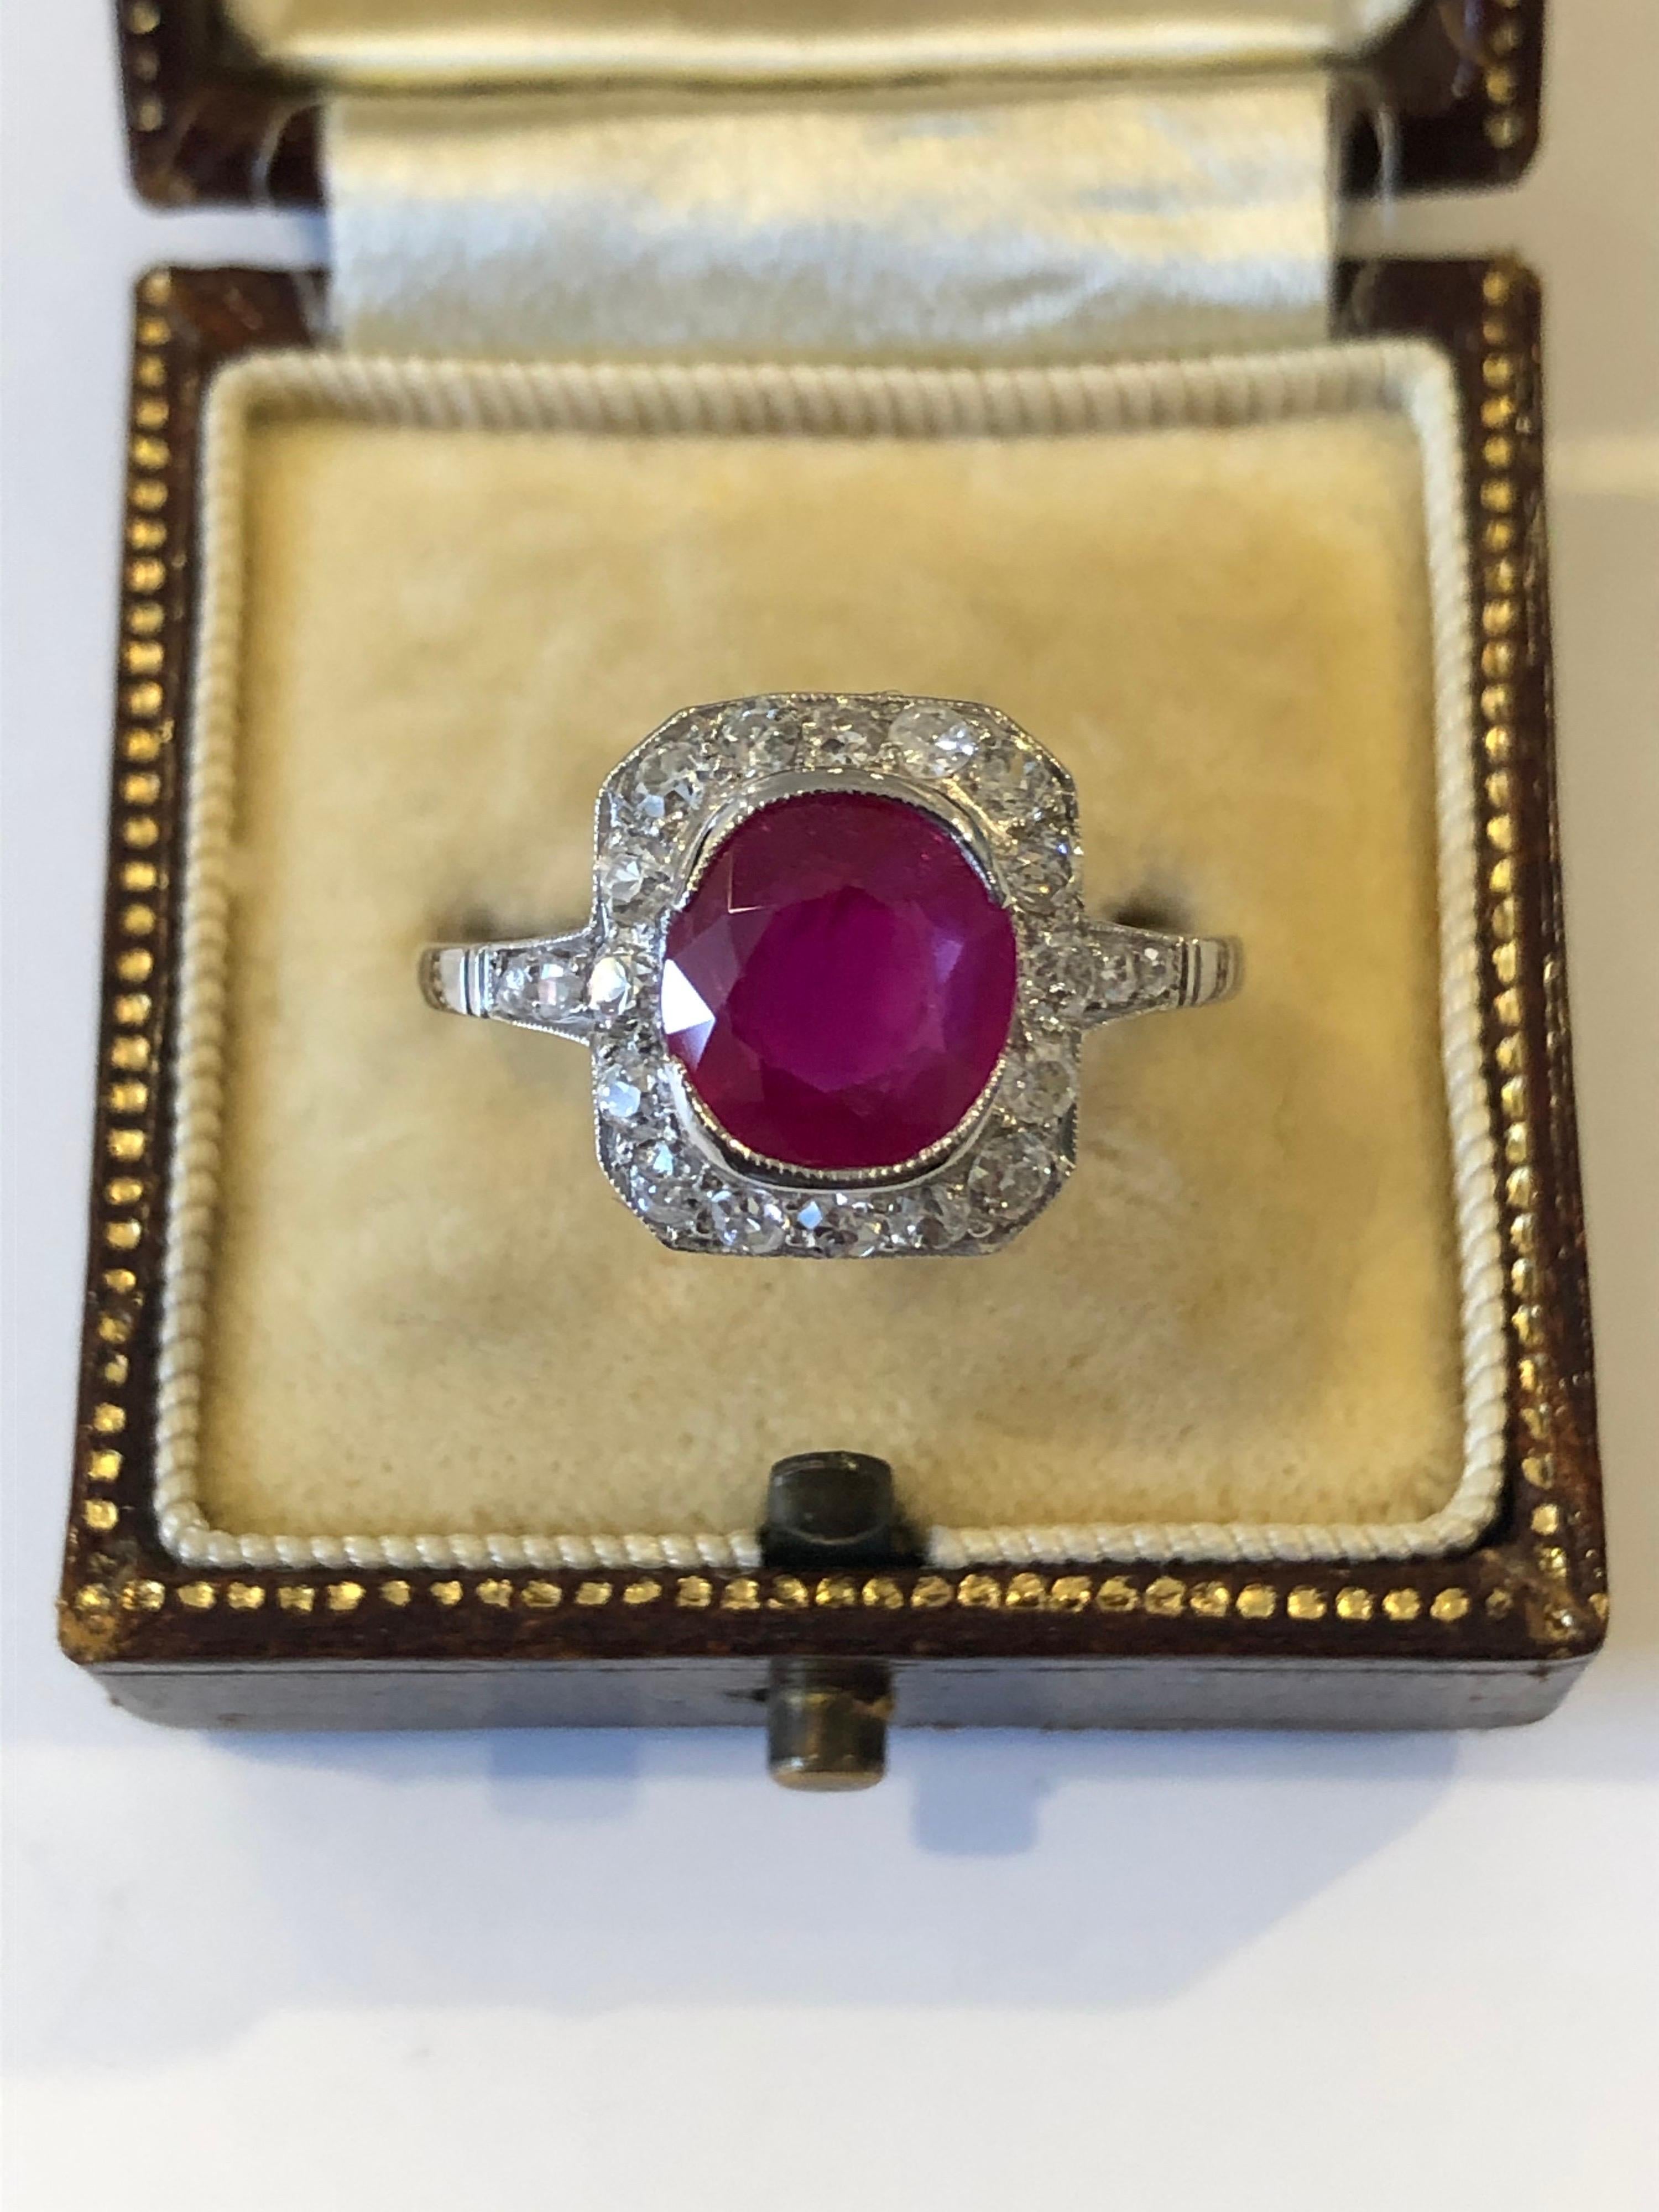 An Art Deco ruby and diamond ring. The ring centres a certificated Burmese Ruby of excellent colour that weighs 1.98ct
The ring is in excellent condition
Price includes free shipping, original certification and a presentation box
